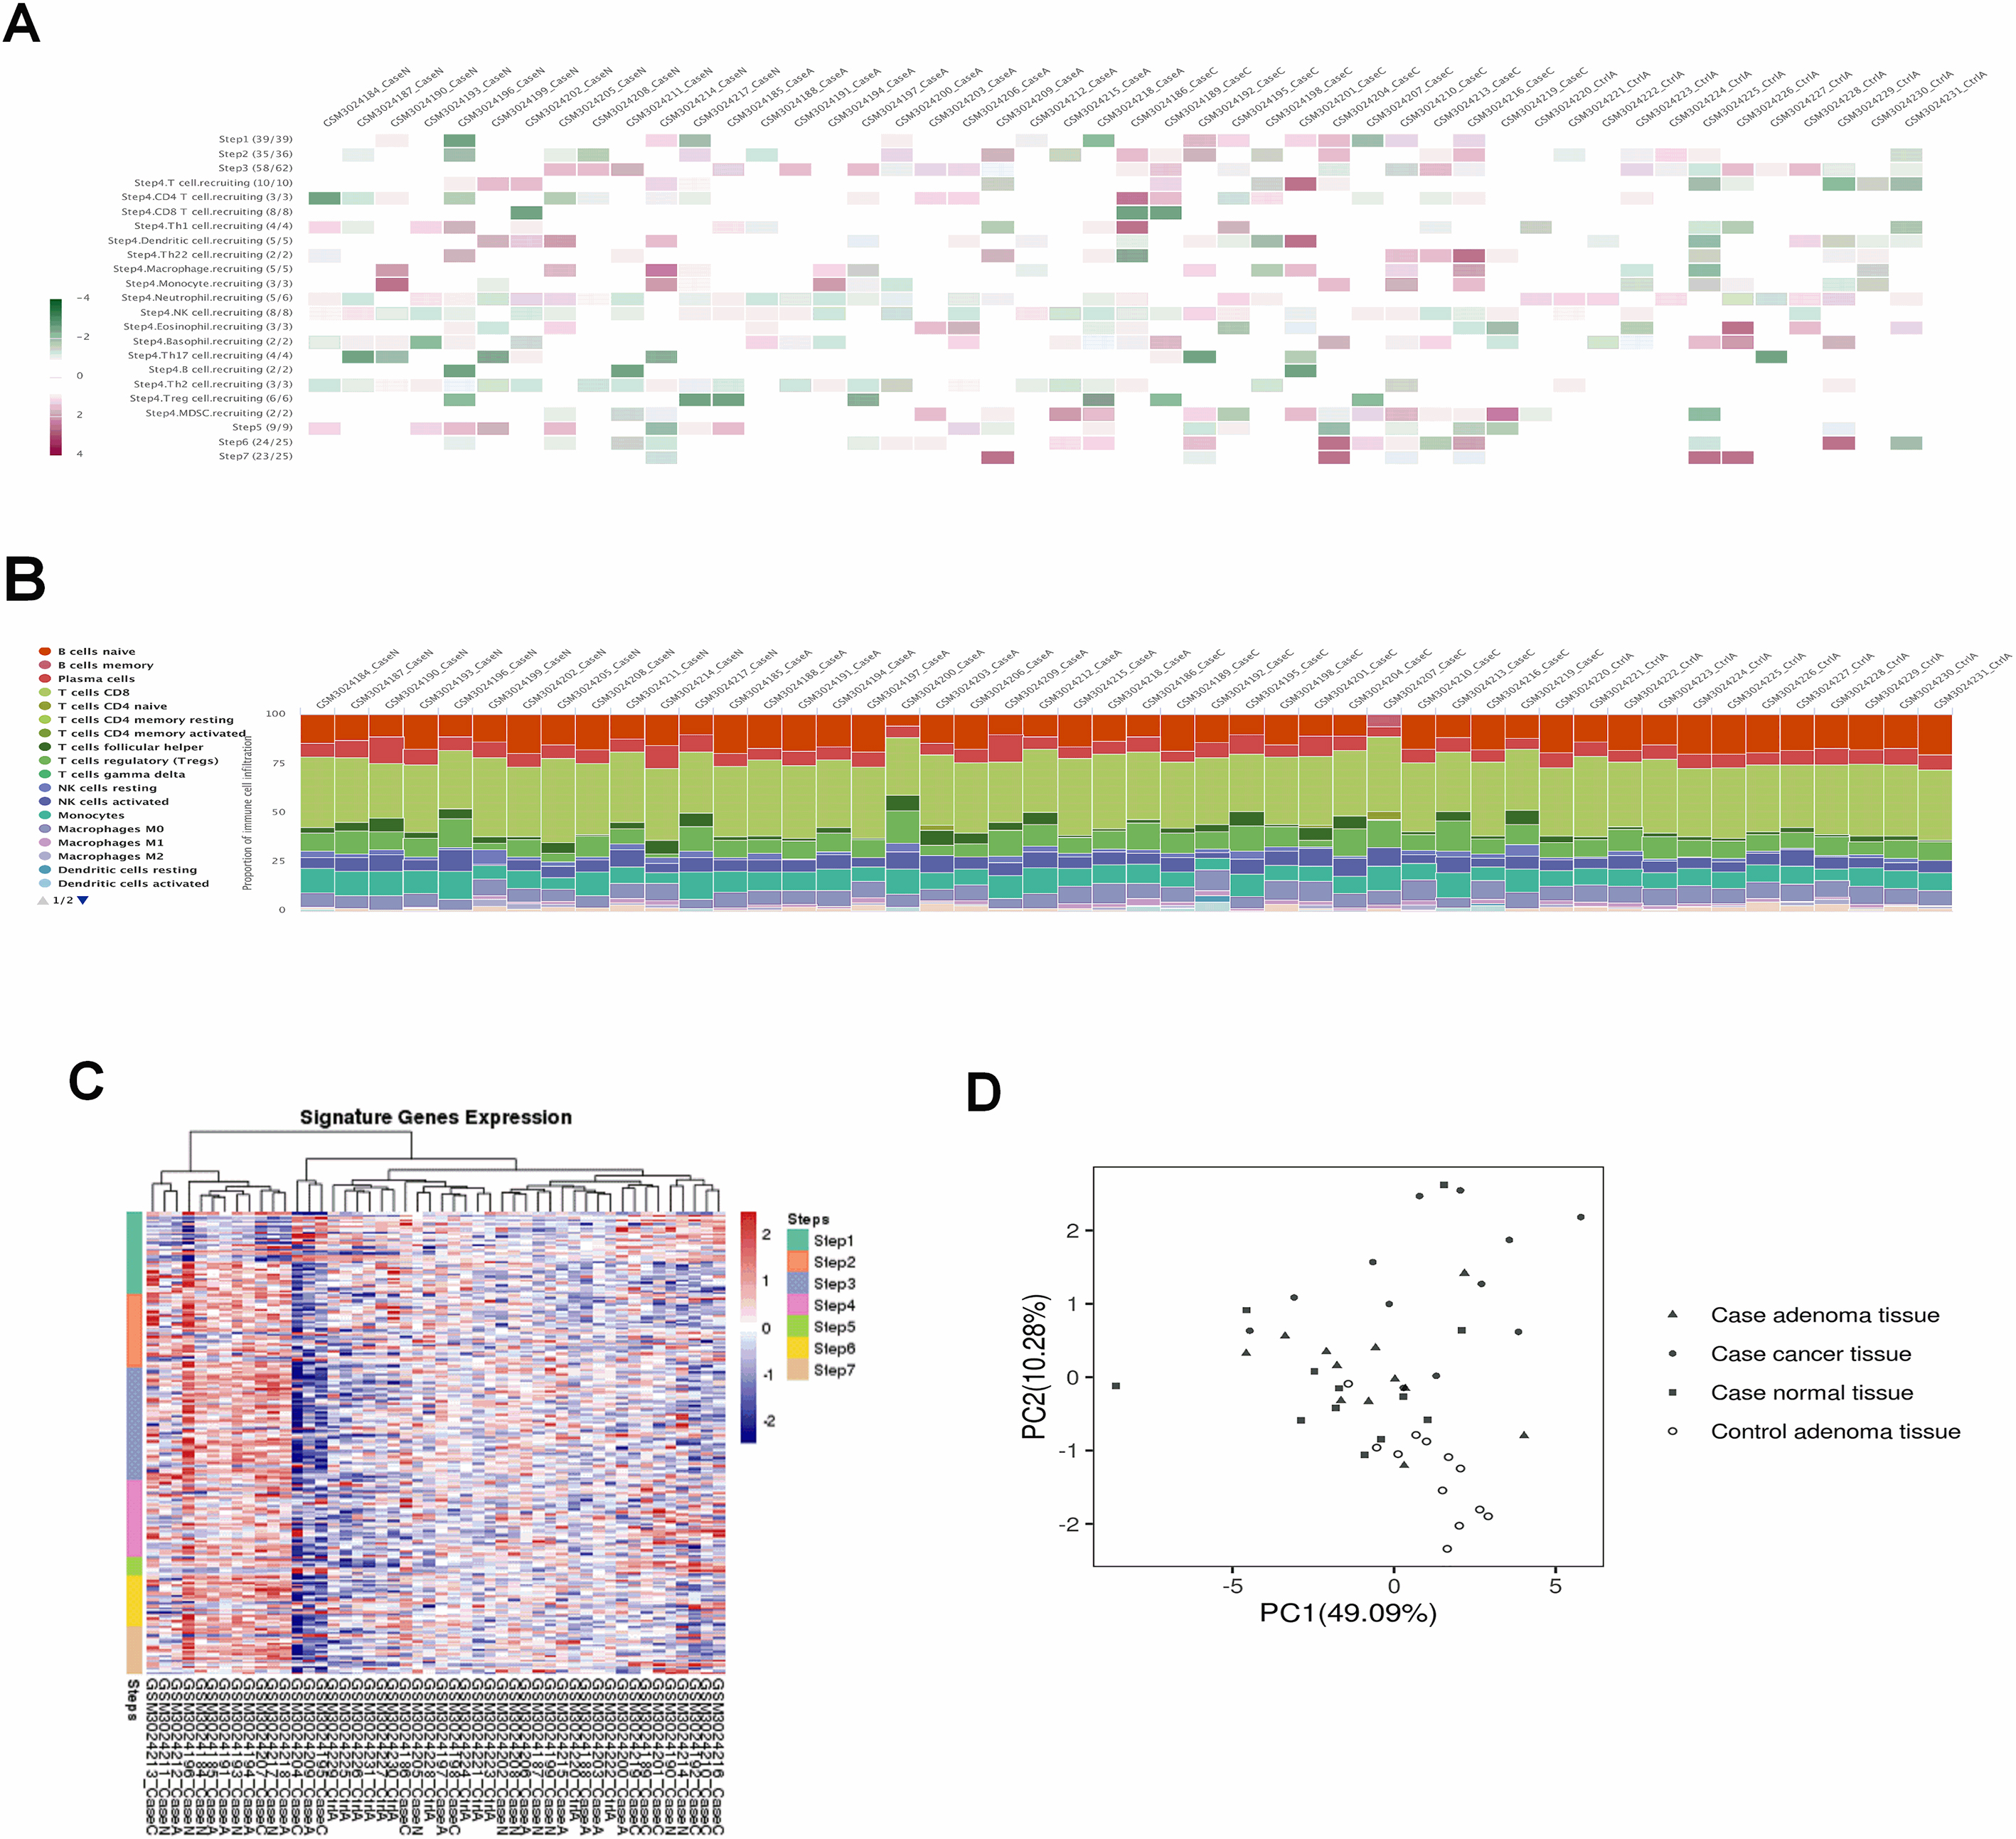 Global visualization of the immunophenotype across samples from TCGA. (A) The heatmap of 23 normalized immune activity scores in 48 samples. (B) The relative proportion of tumor-infiltrating immune cells. (C) Left, the expression pattern of signature genes from the seven-step cancer-immunity cycle. Each row represents a single gene, and each column represents one sample. Right, the principal component analysis (PCA) of signature genes expression for all samples.